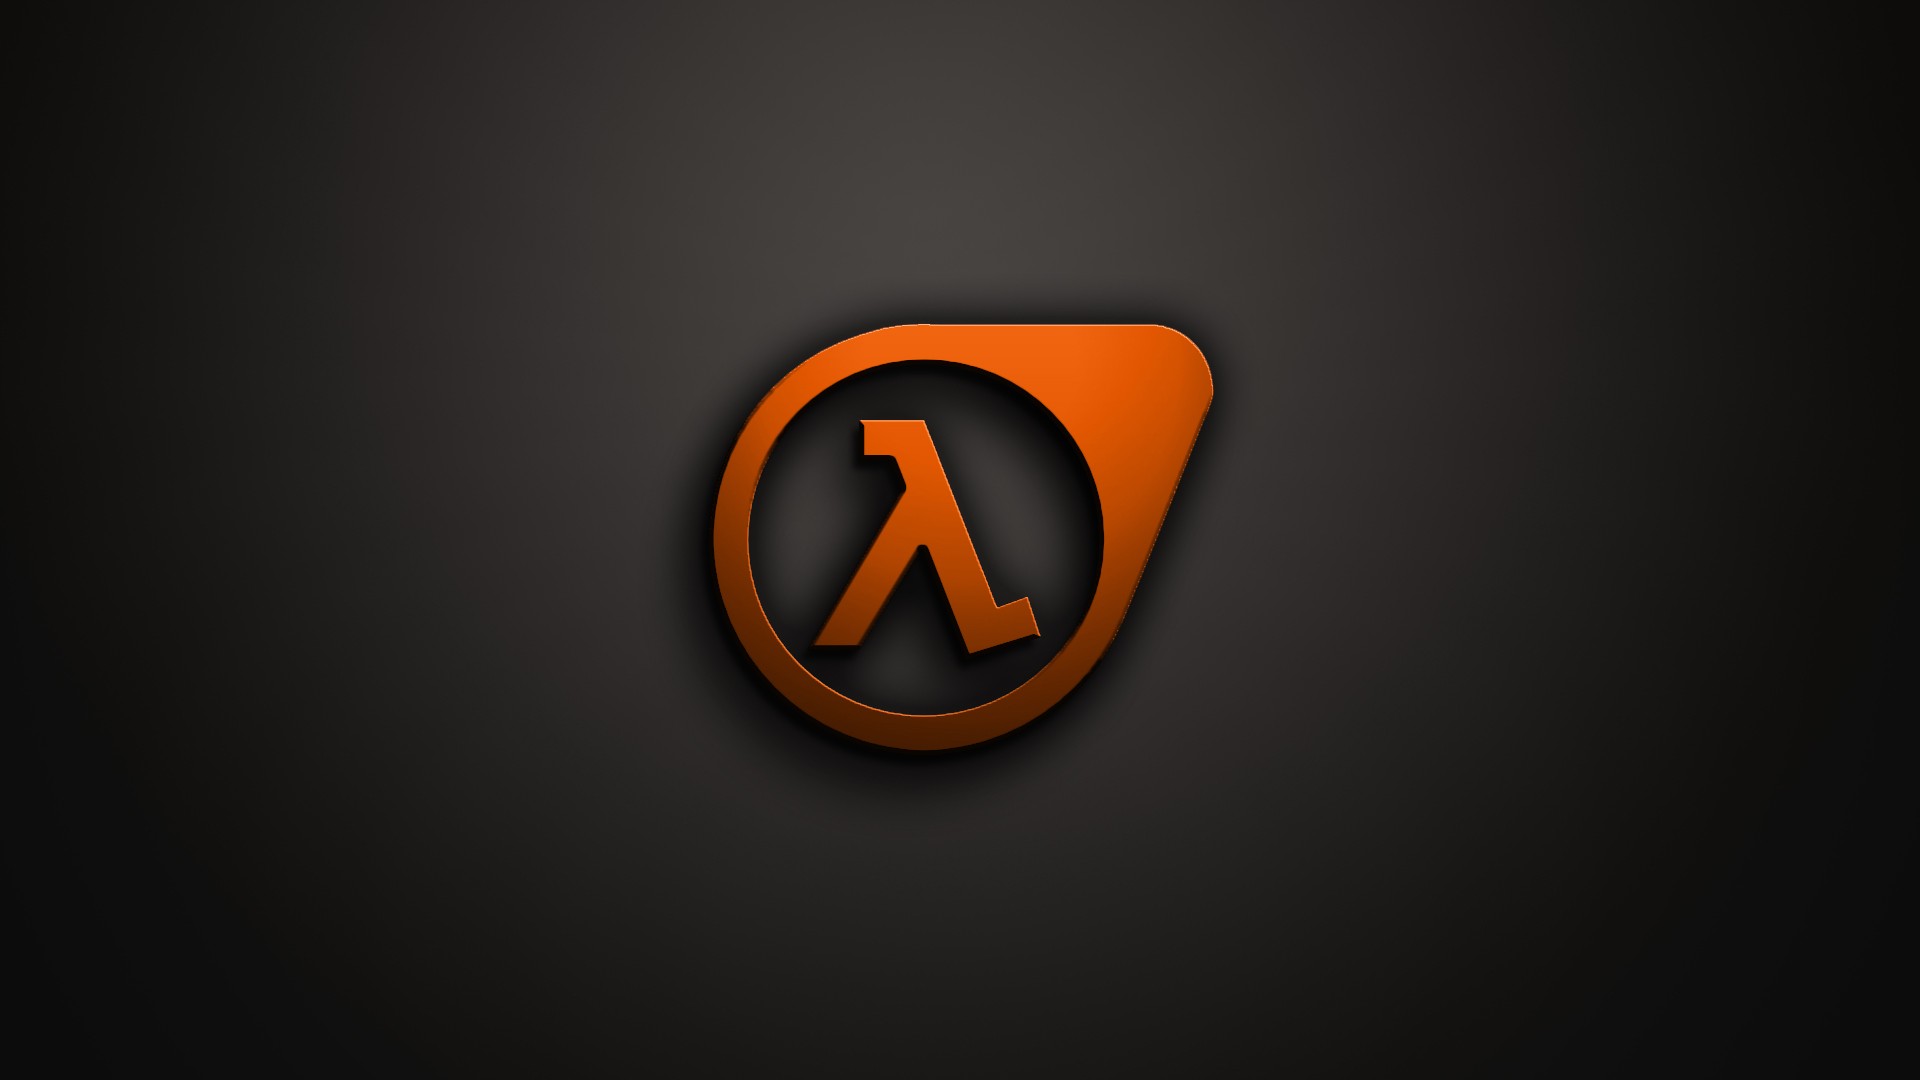 Video Game Half-Life 3 HD Wallpaper | Background Image